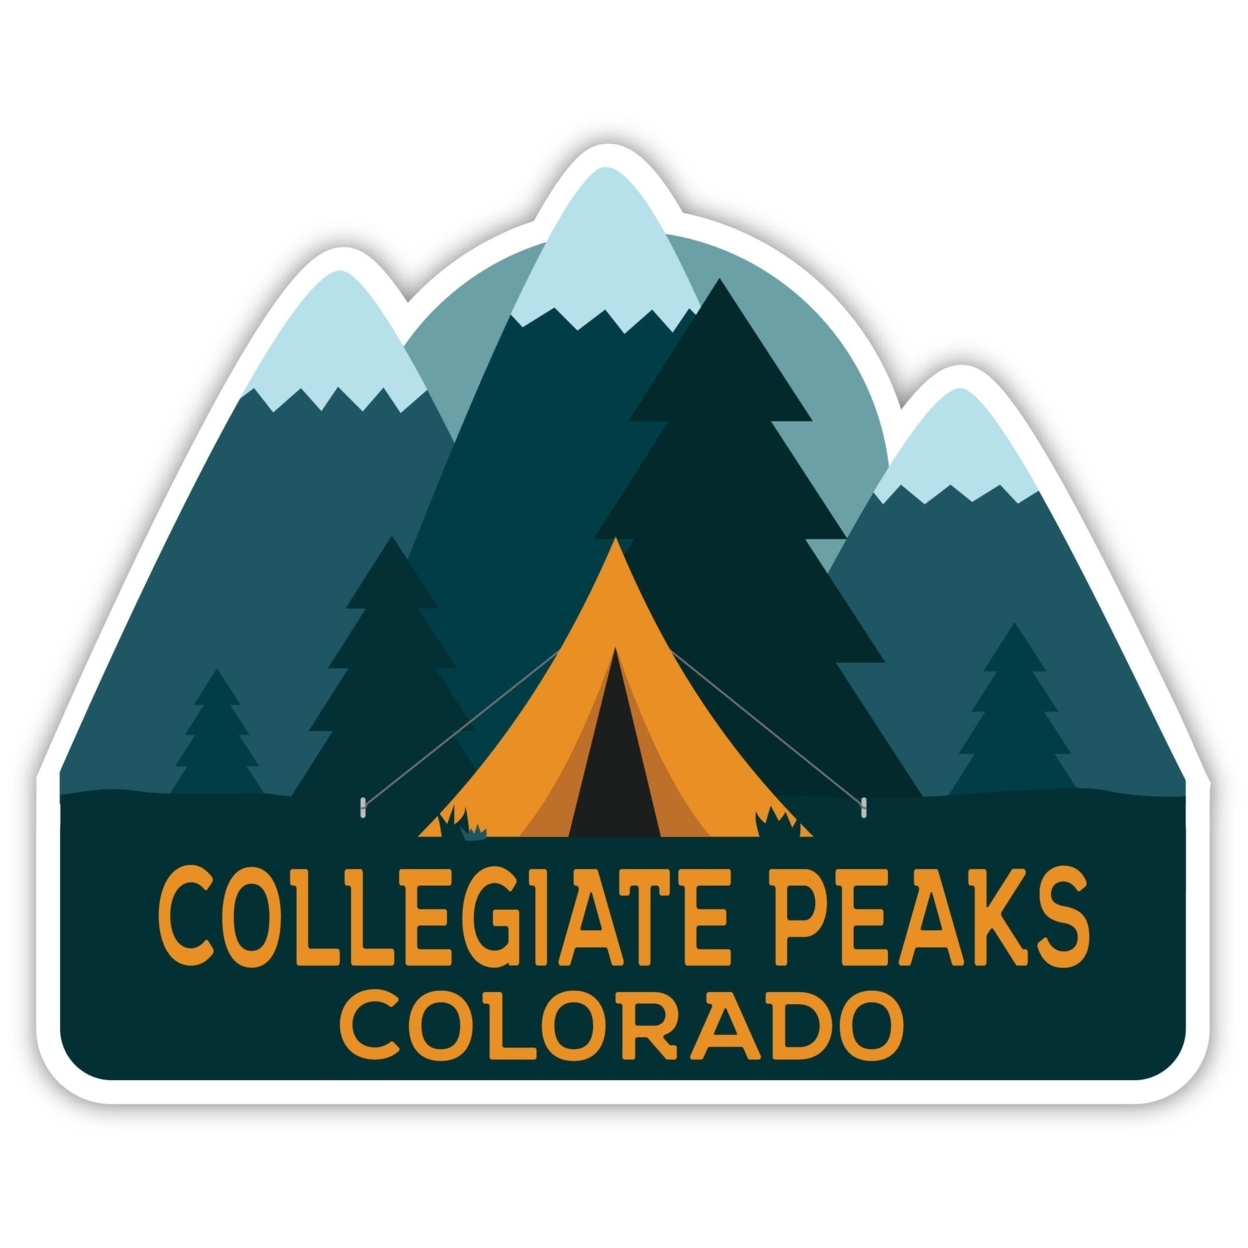 Collegiate Peaks Colorado Souvenir Decorative Stickers (Choose Theme And Size) - 4-Pack, 10-Inch, Great Outdoors